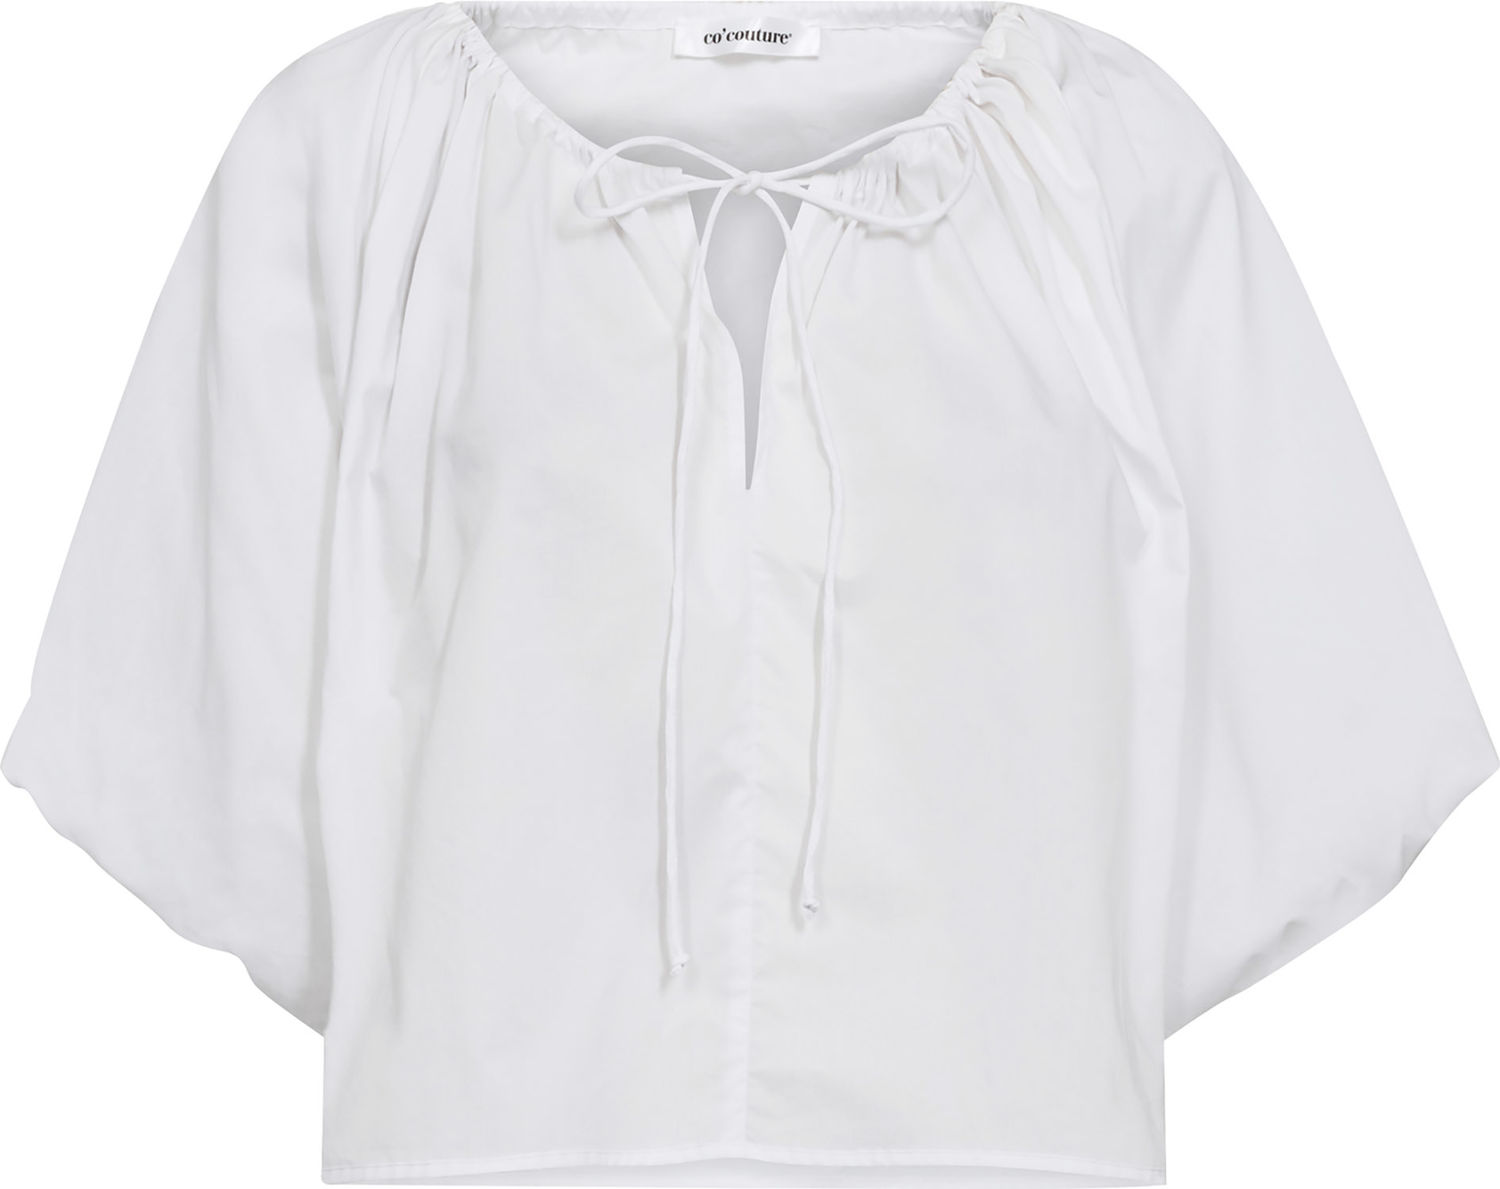 Co'couture Blouse Prima Wit dames